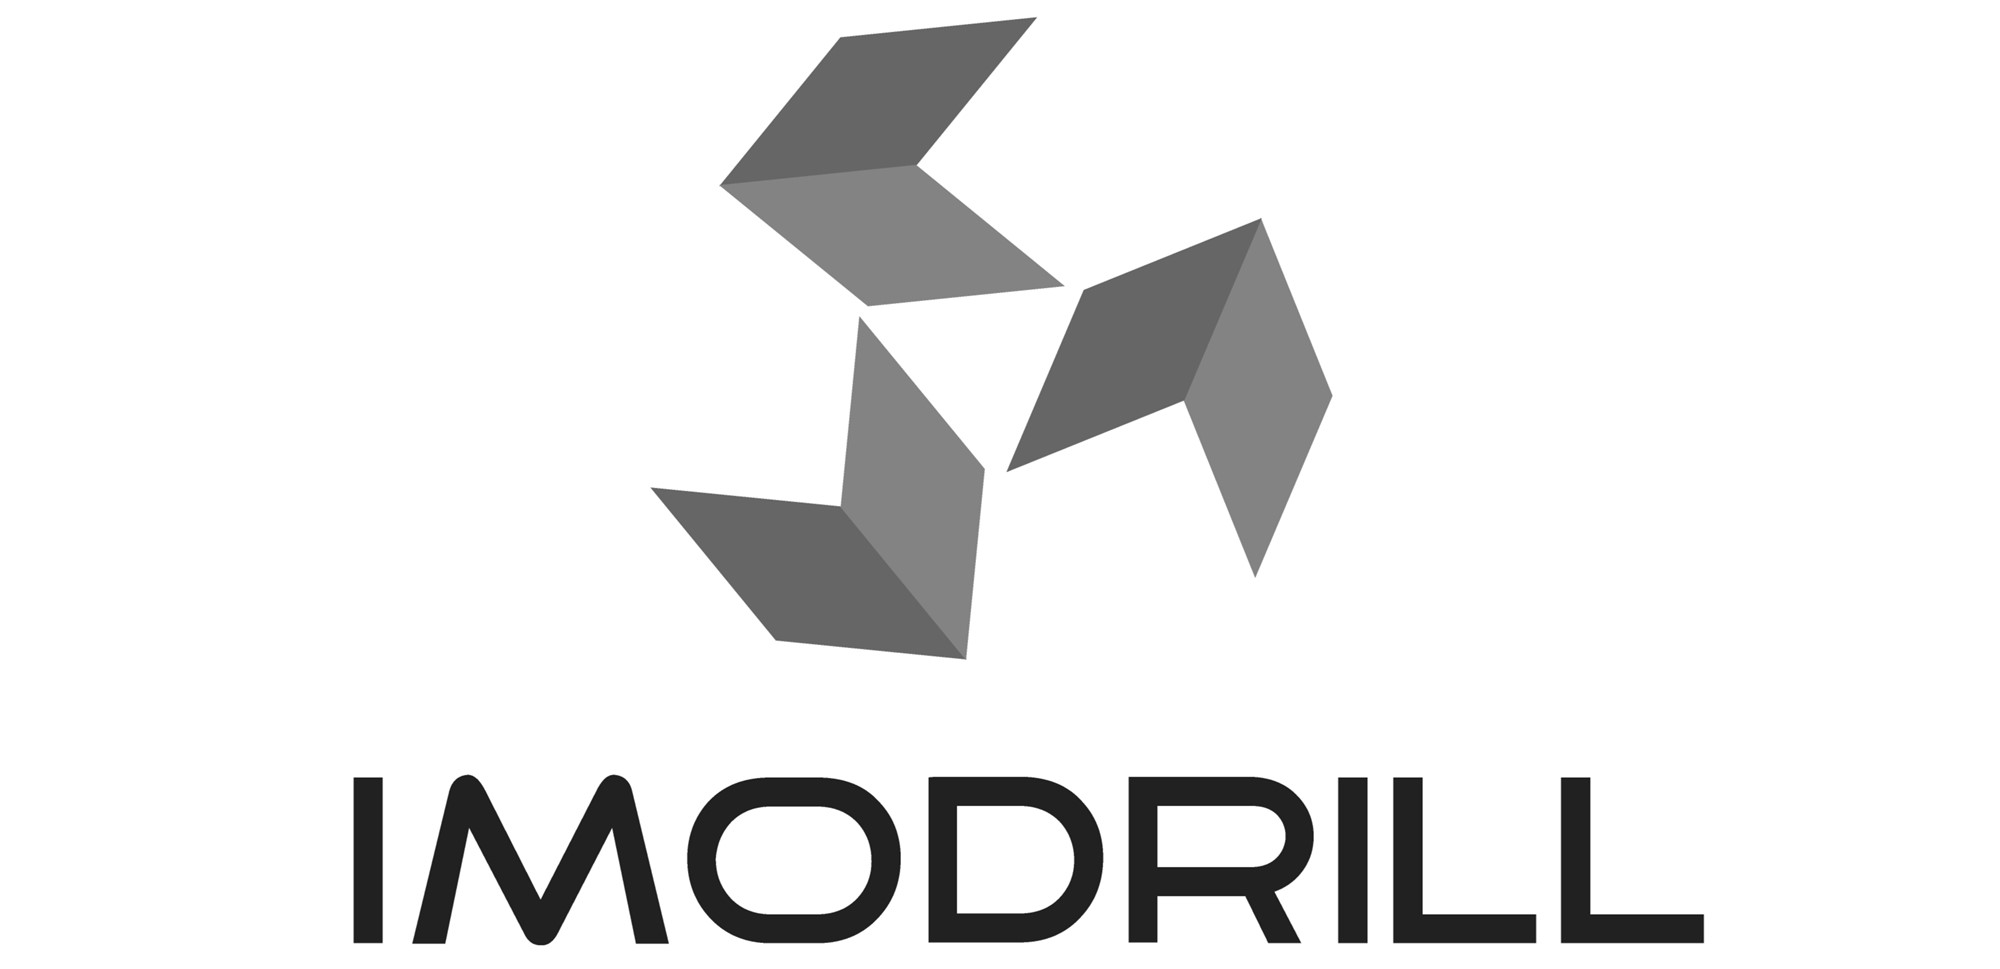 /zArchives/Pages/1/Photos/imodrill-logo-01-01.jpg